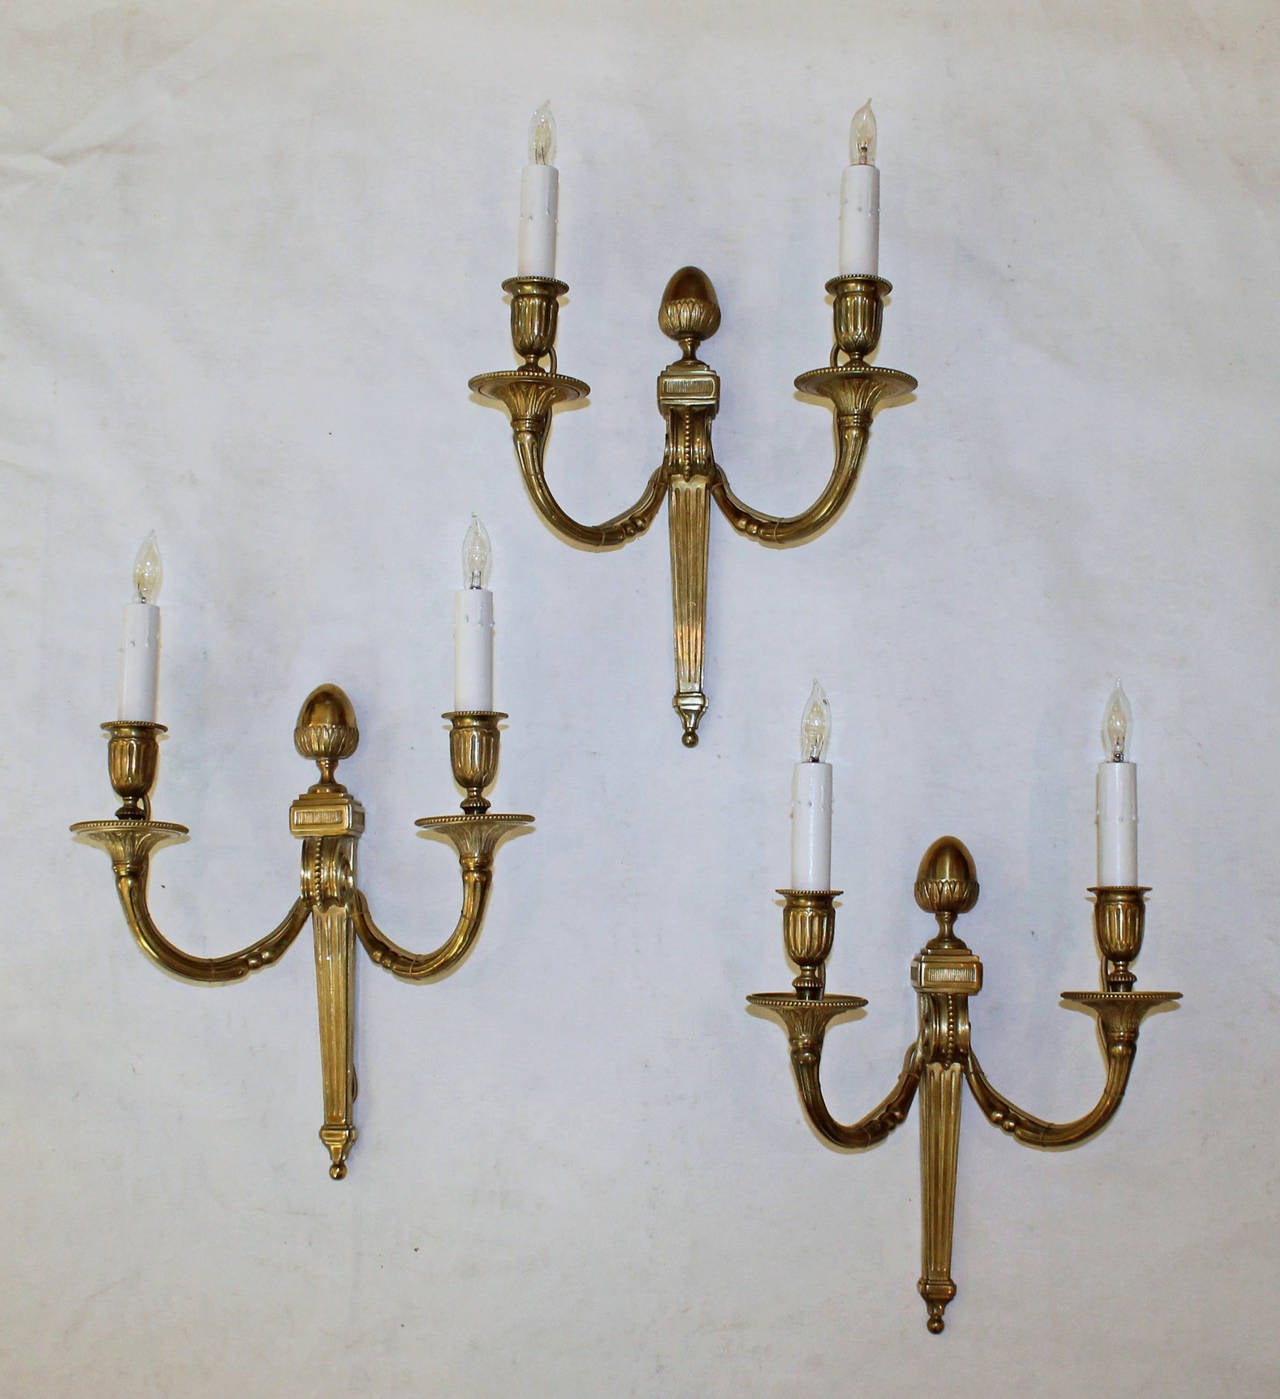 Set of three Louis XVI style bronze or brass two-arm wall sconces, by Maison Baguès, Paris, style # 9271. Newly wired for US. Retains original Baguès foil label. 

Measures: 10-3/8